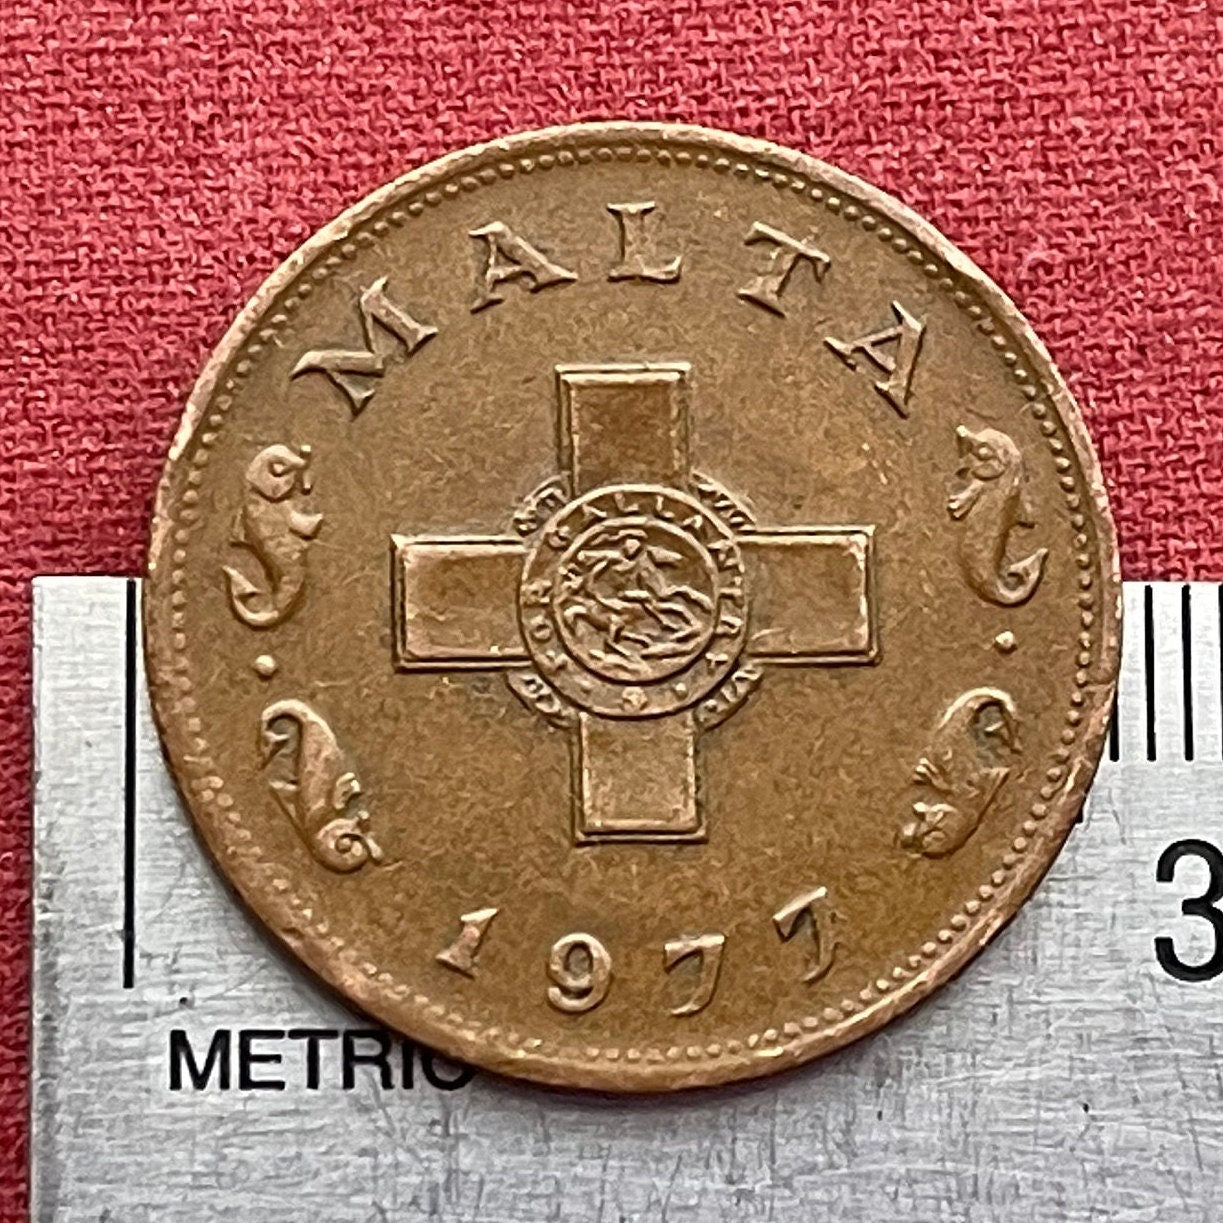 George Cross 1 Cent Malta Authentic Coin Money for Jewelry and Craft Making (For Gallantry) (St George and the Dragon) (Dolphins) VERY FINE